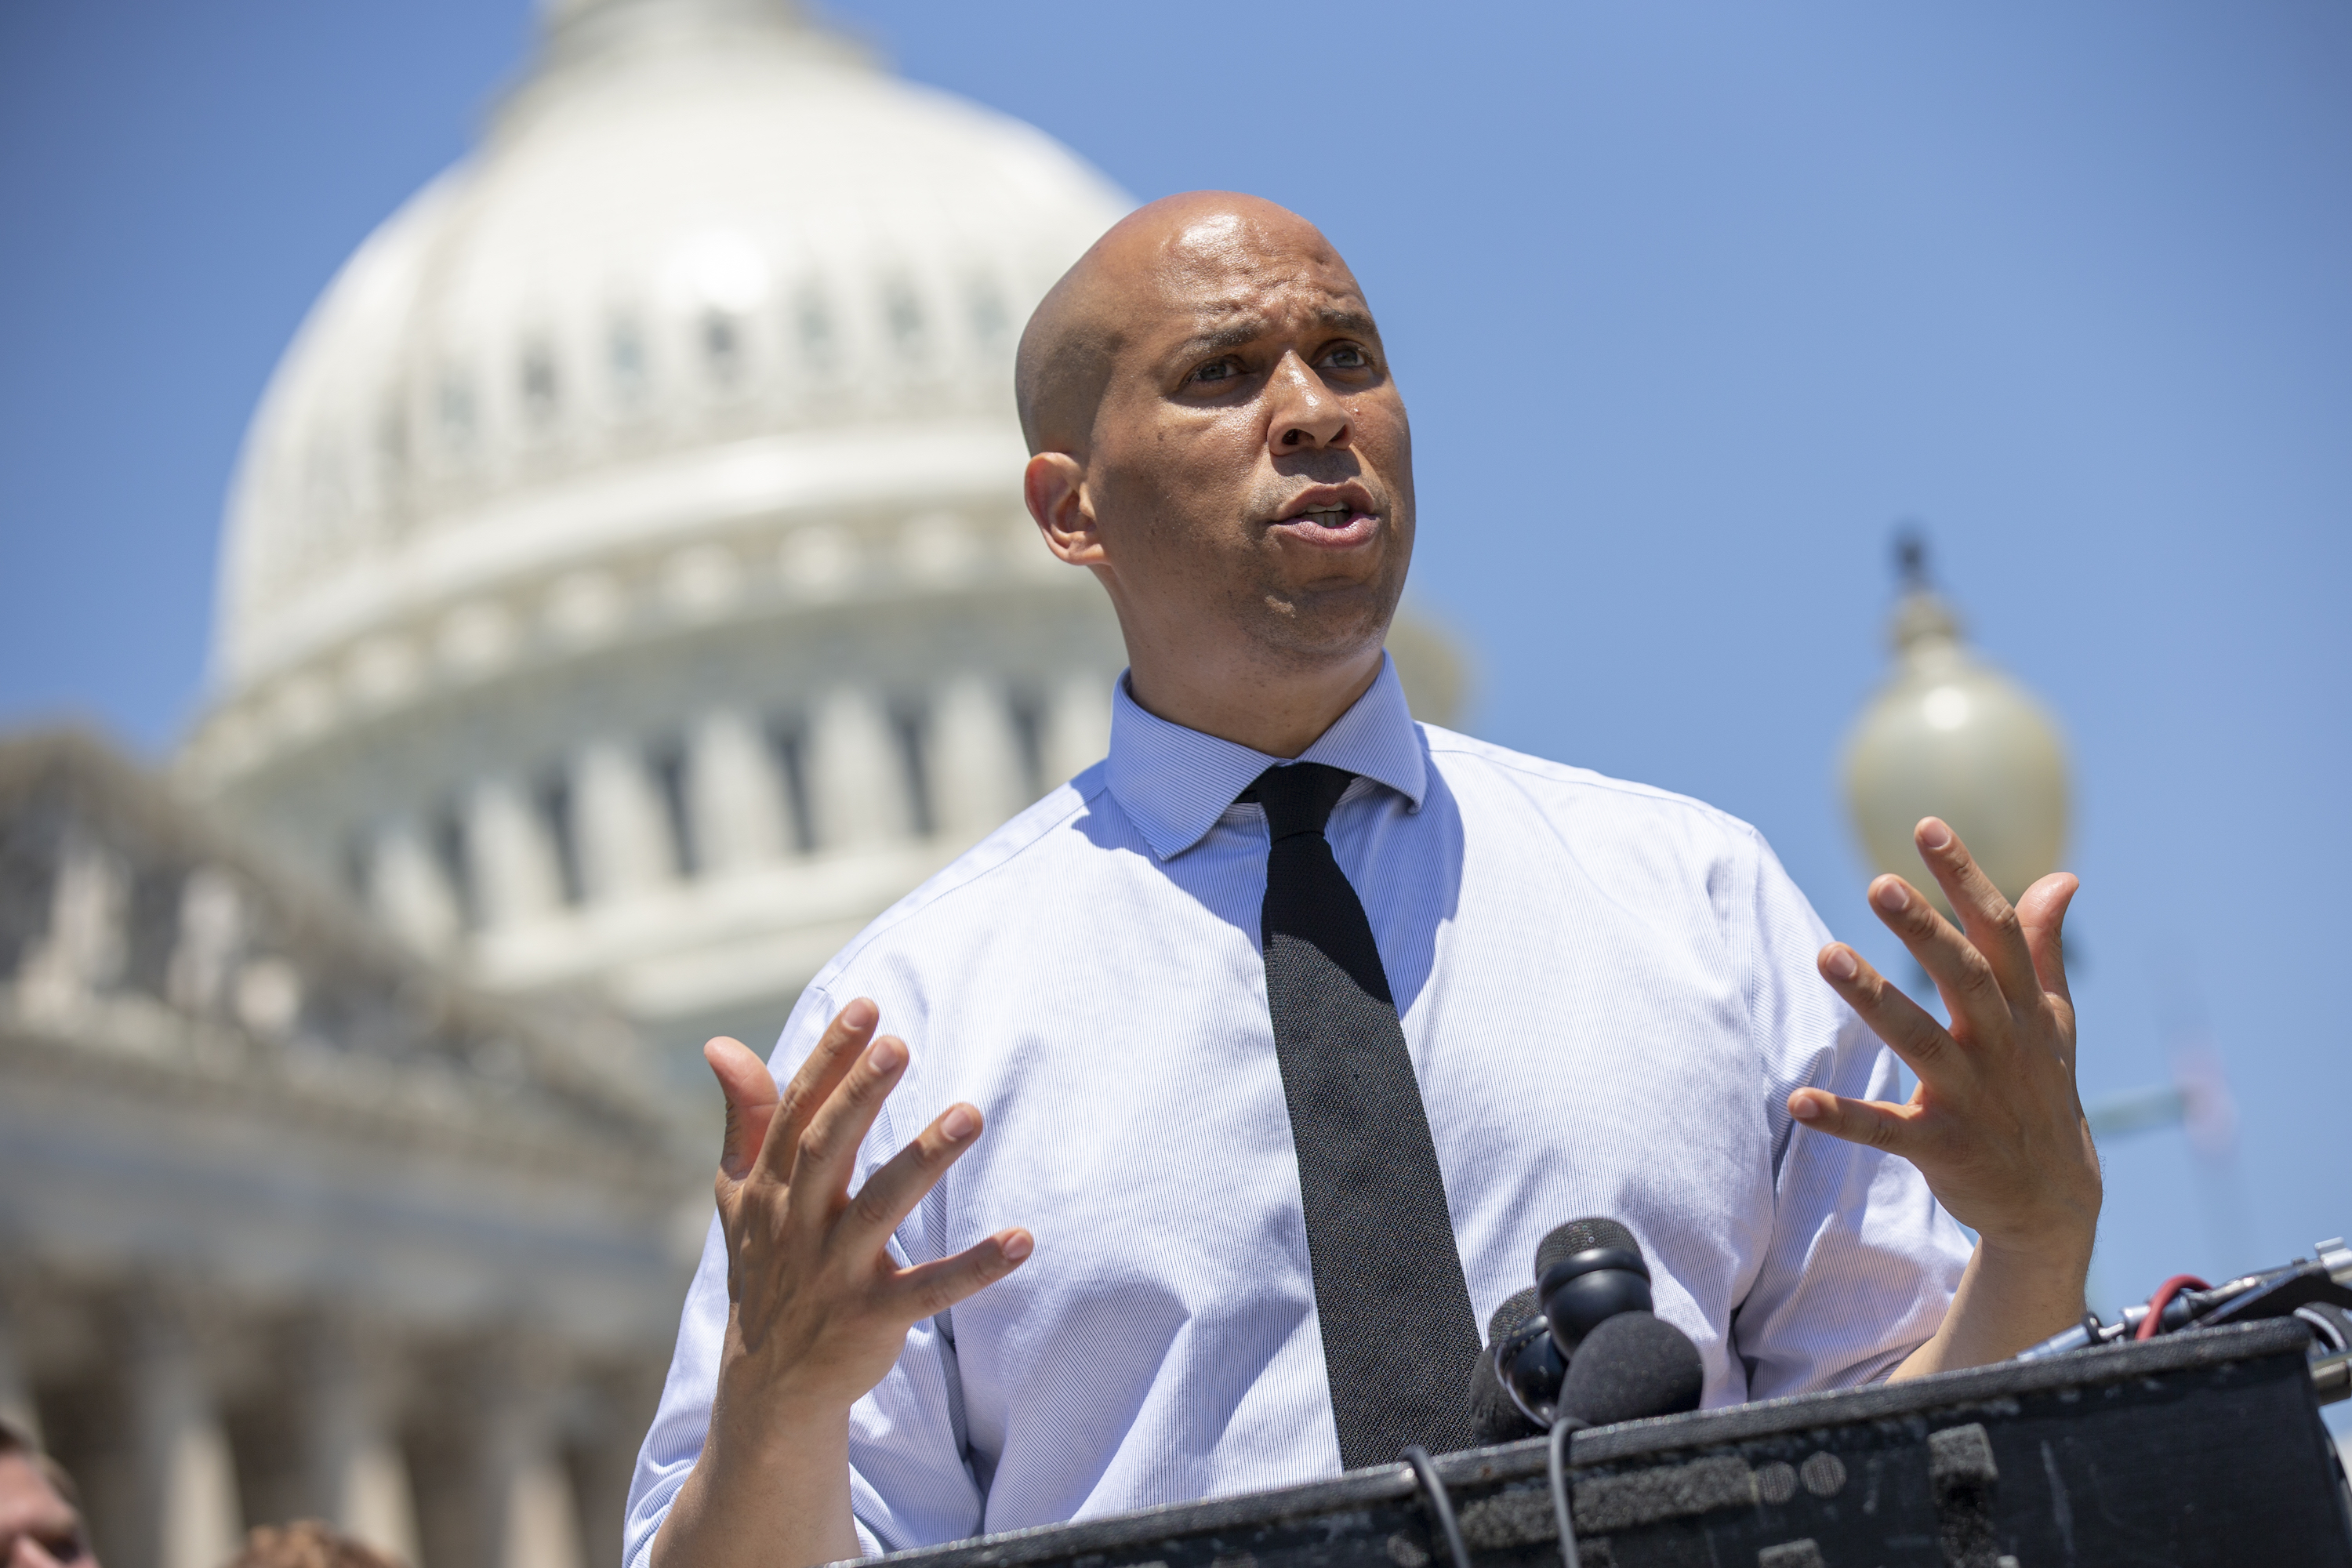 Sen. Cory Booker (D-NJ) speaks during a news conference regarding the separation of immigrant children at the U.S. Capitol on July 10, 2018 in Washington, DC. Booker recently spoke about his potential interest in one day becoming president. (Photo by Alex Edelman/Getty Images)